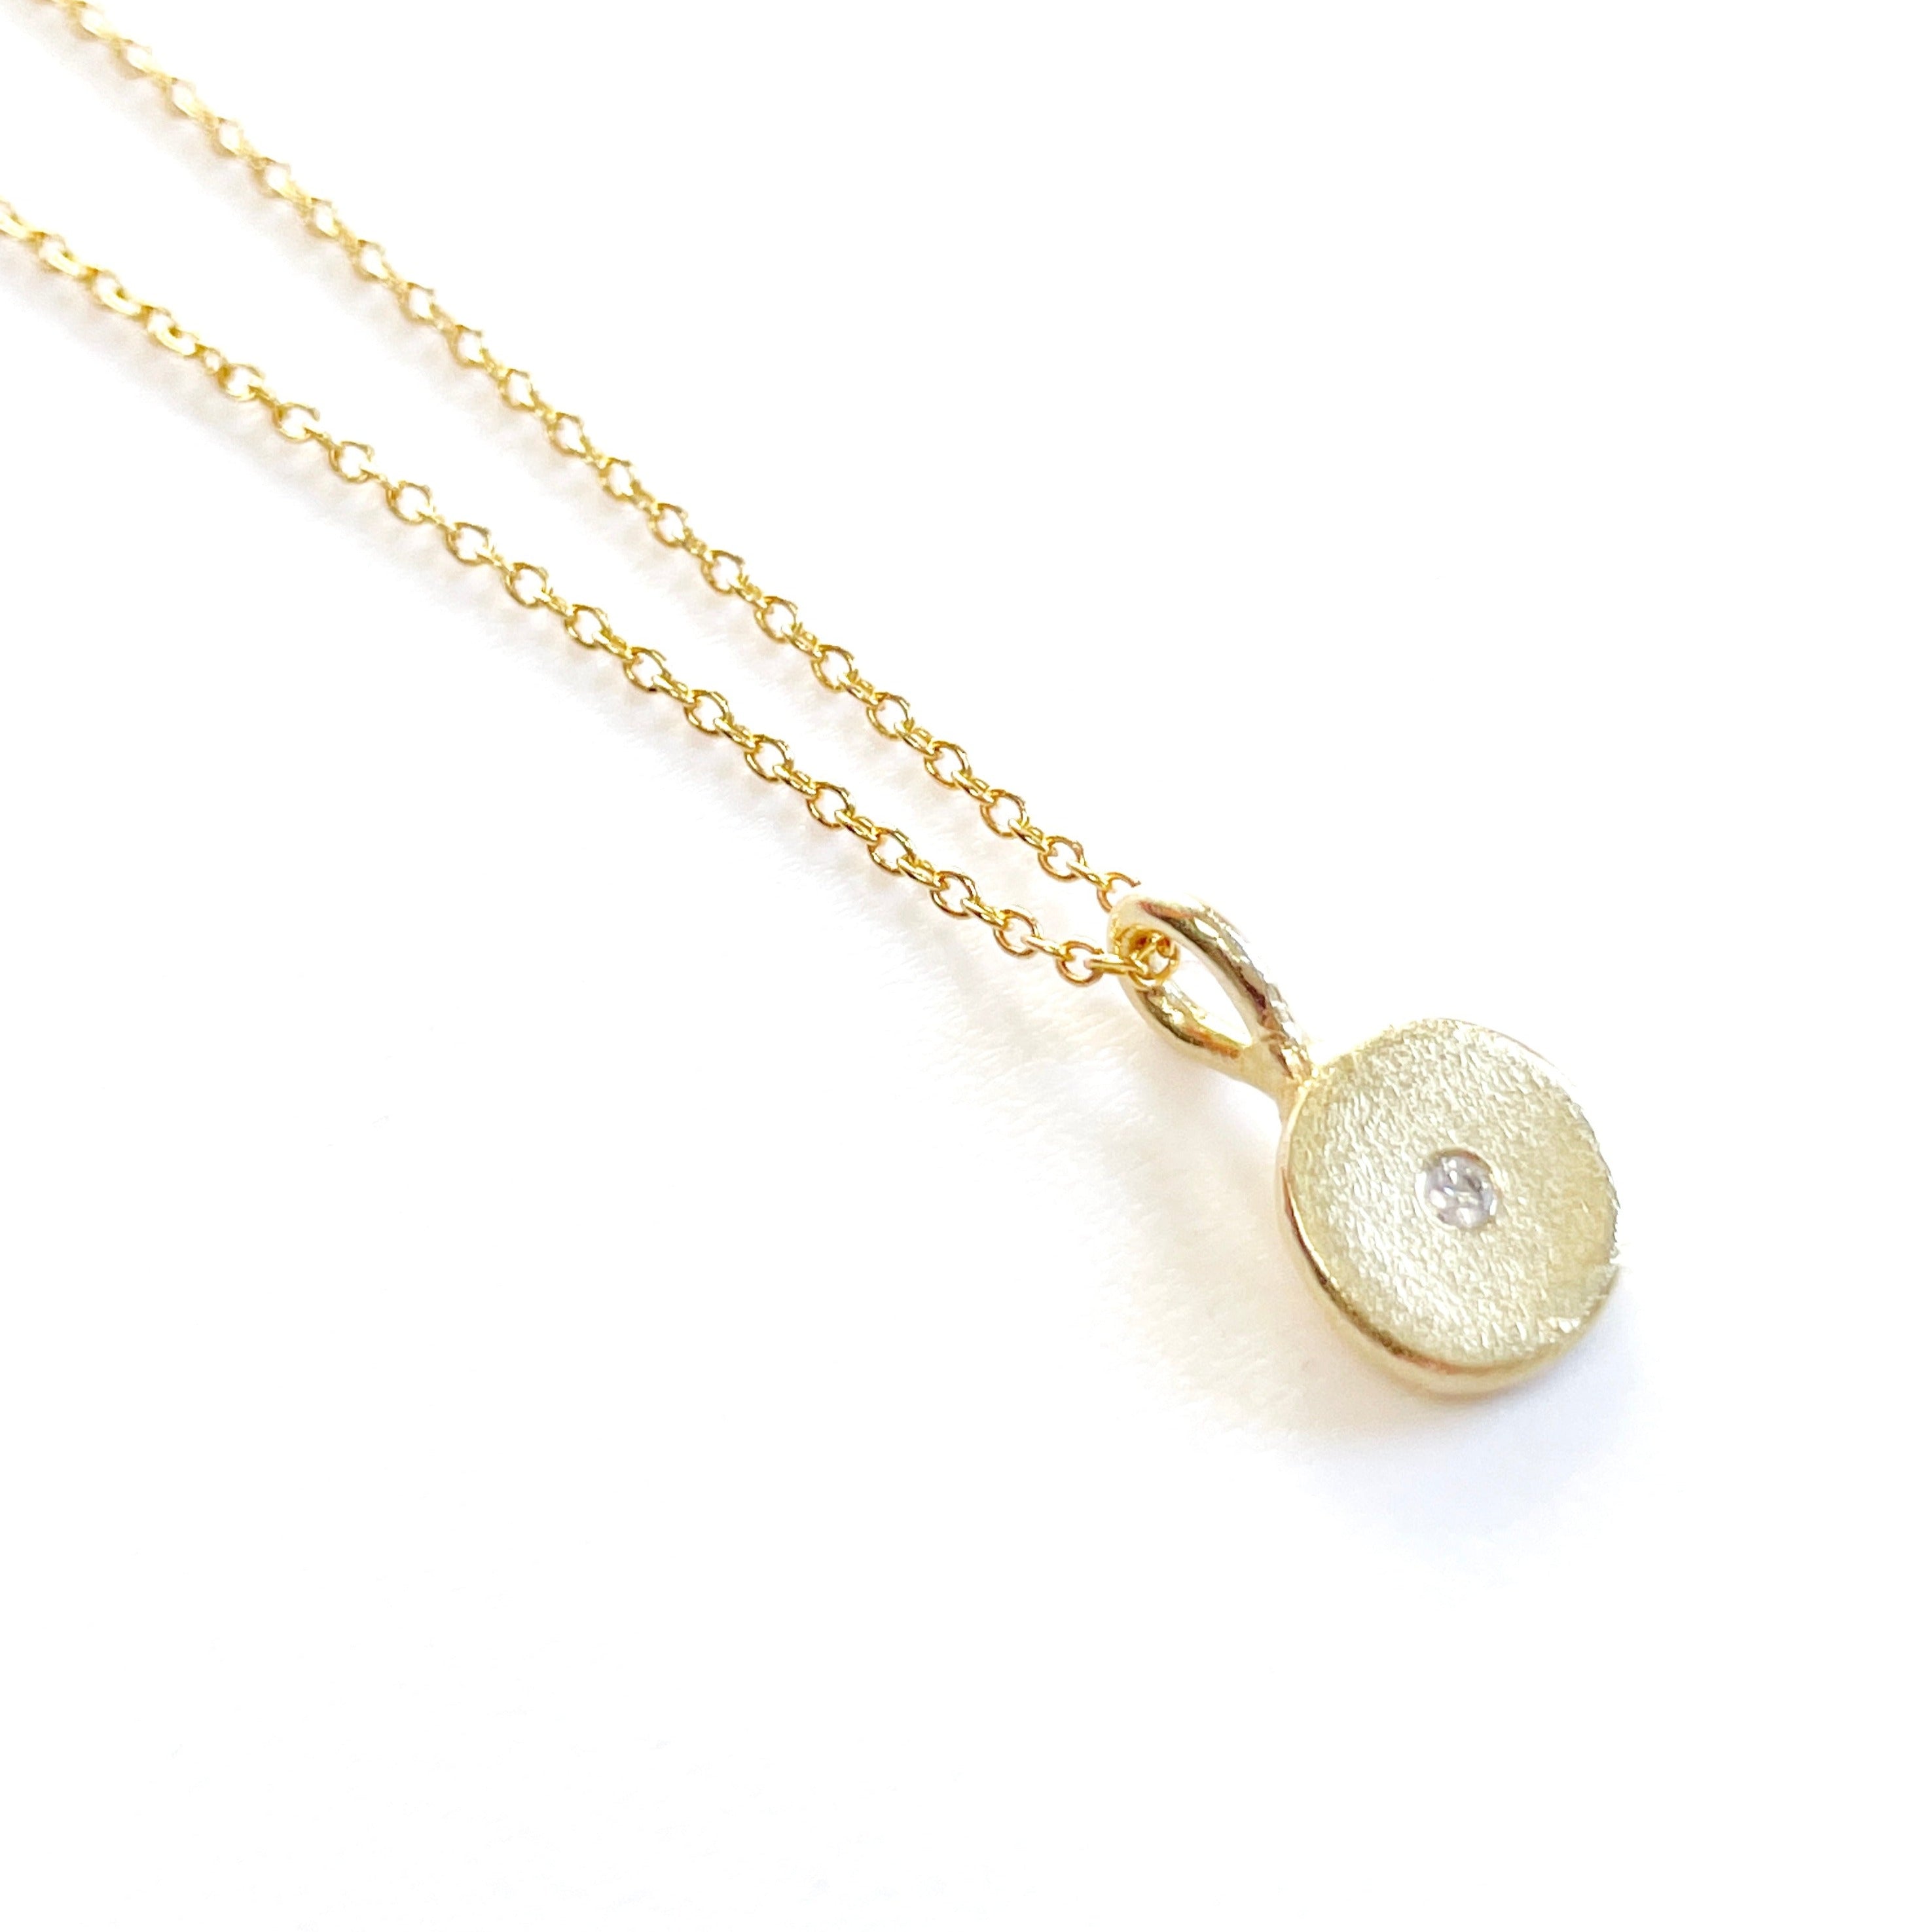 Precious Charm Necklace 14k Solid Gold